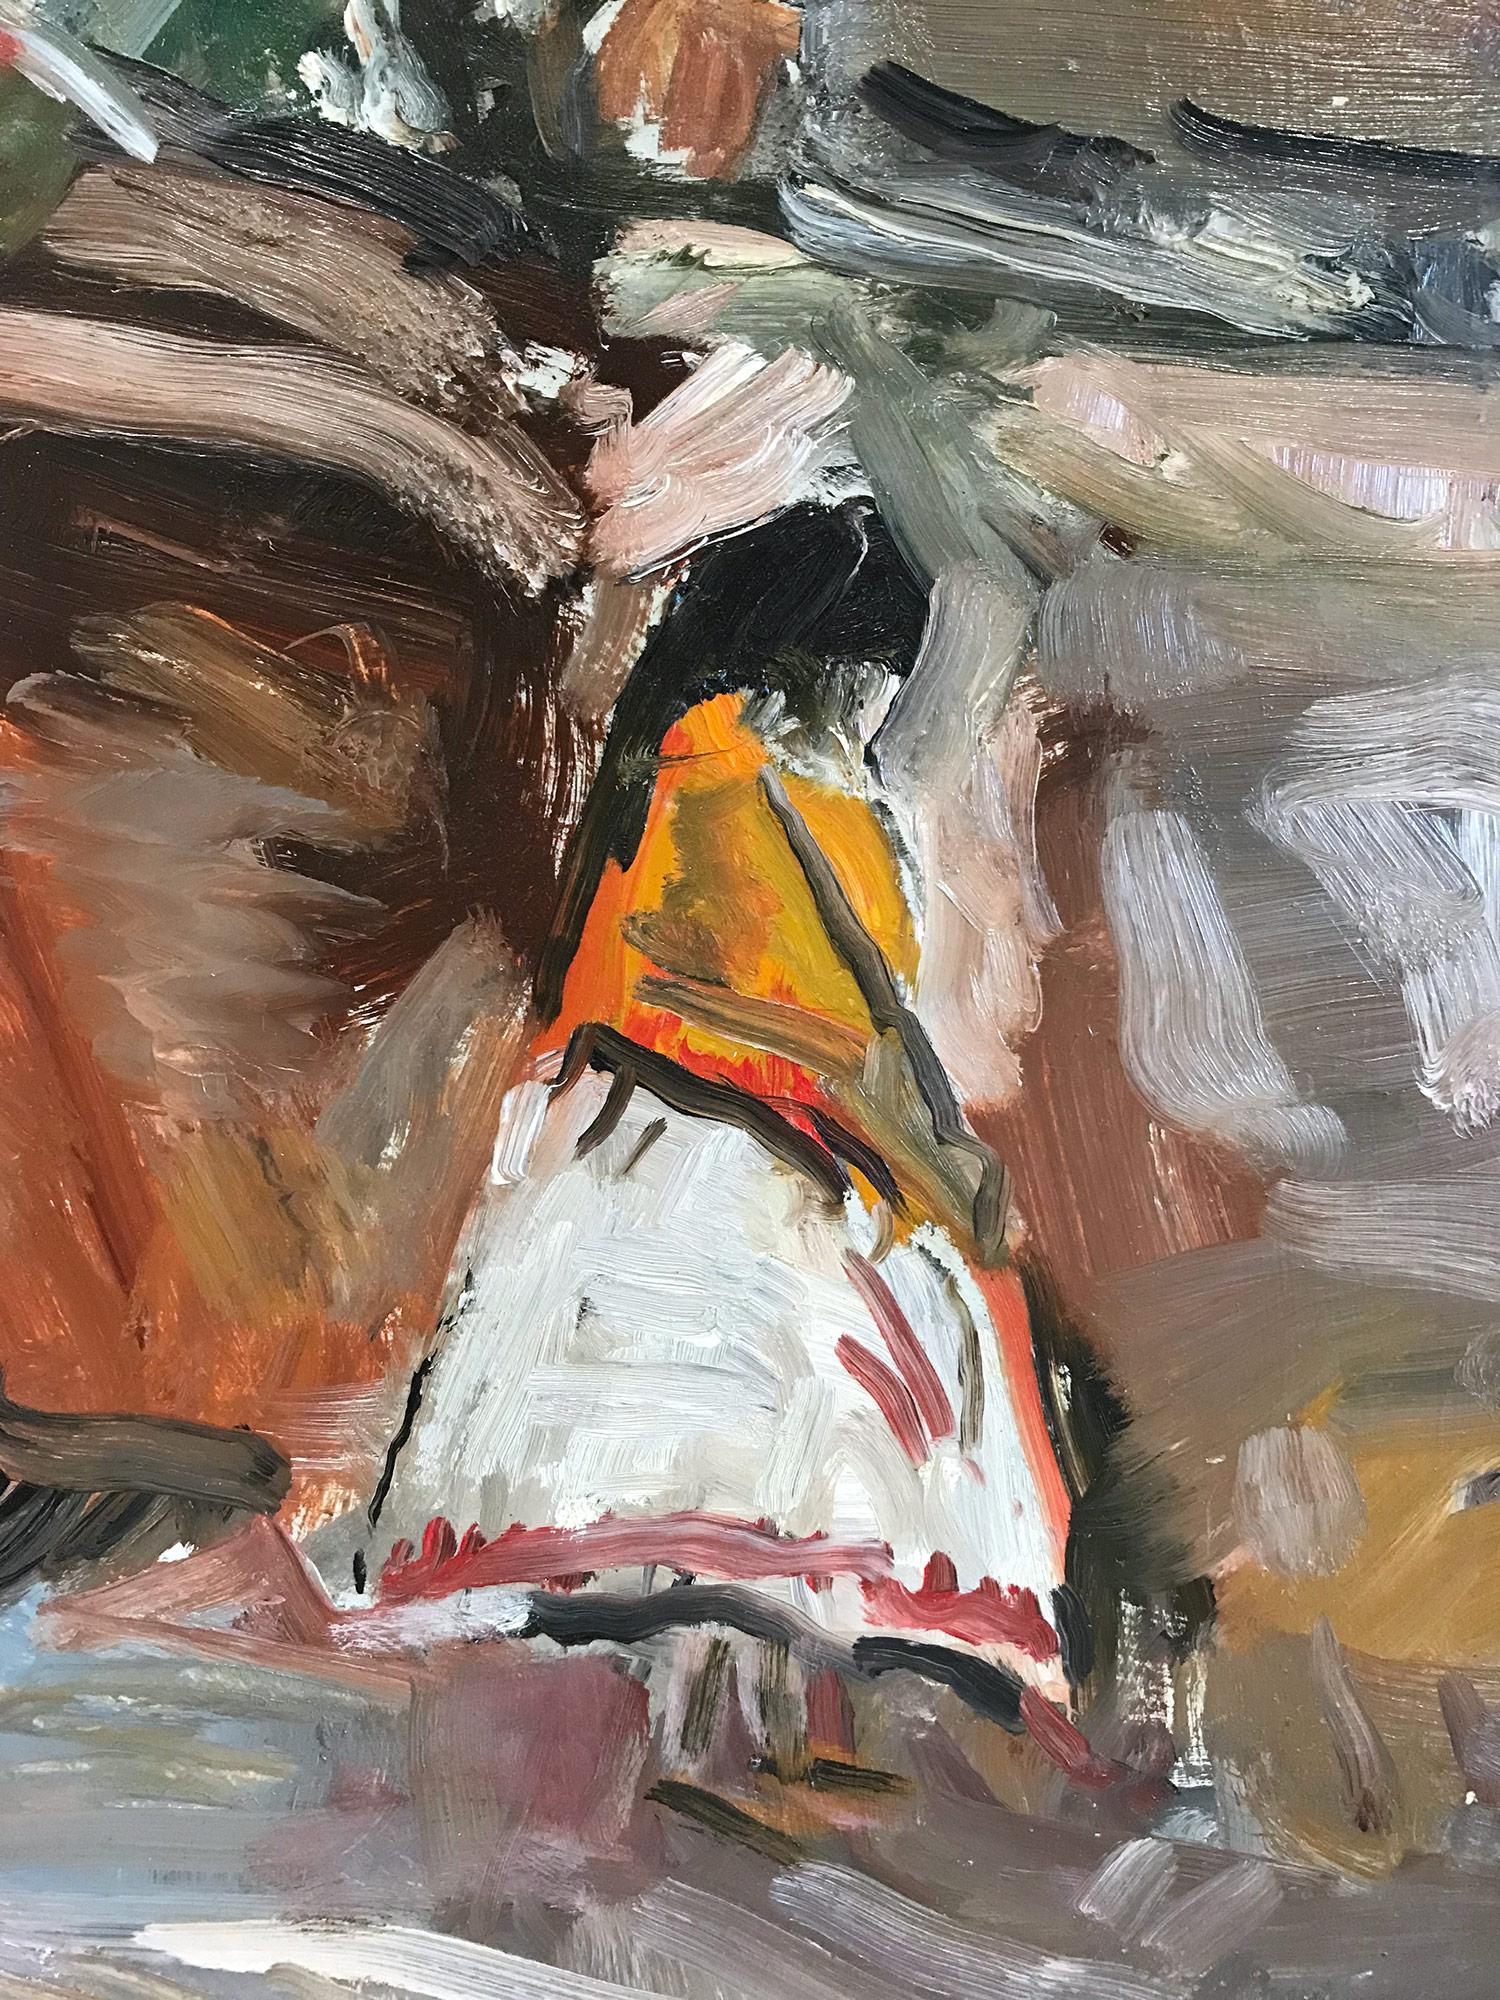 A strong modernist oil painting depicted in 1962 by Russian painter Michael Baxte. Mostly known for his abstracted figures on canvas or street scenes, this piece is a wonderful representation of his portraits in countryside landscapes with